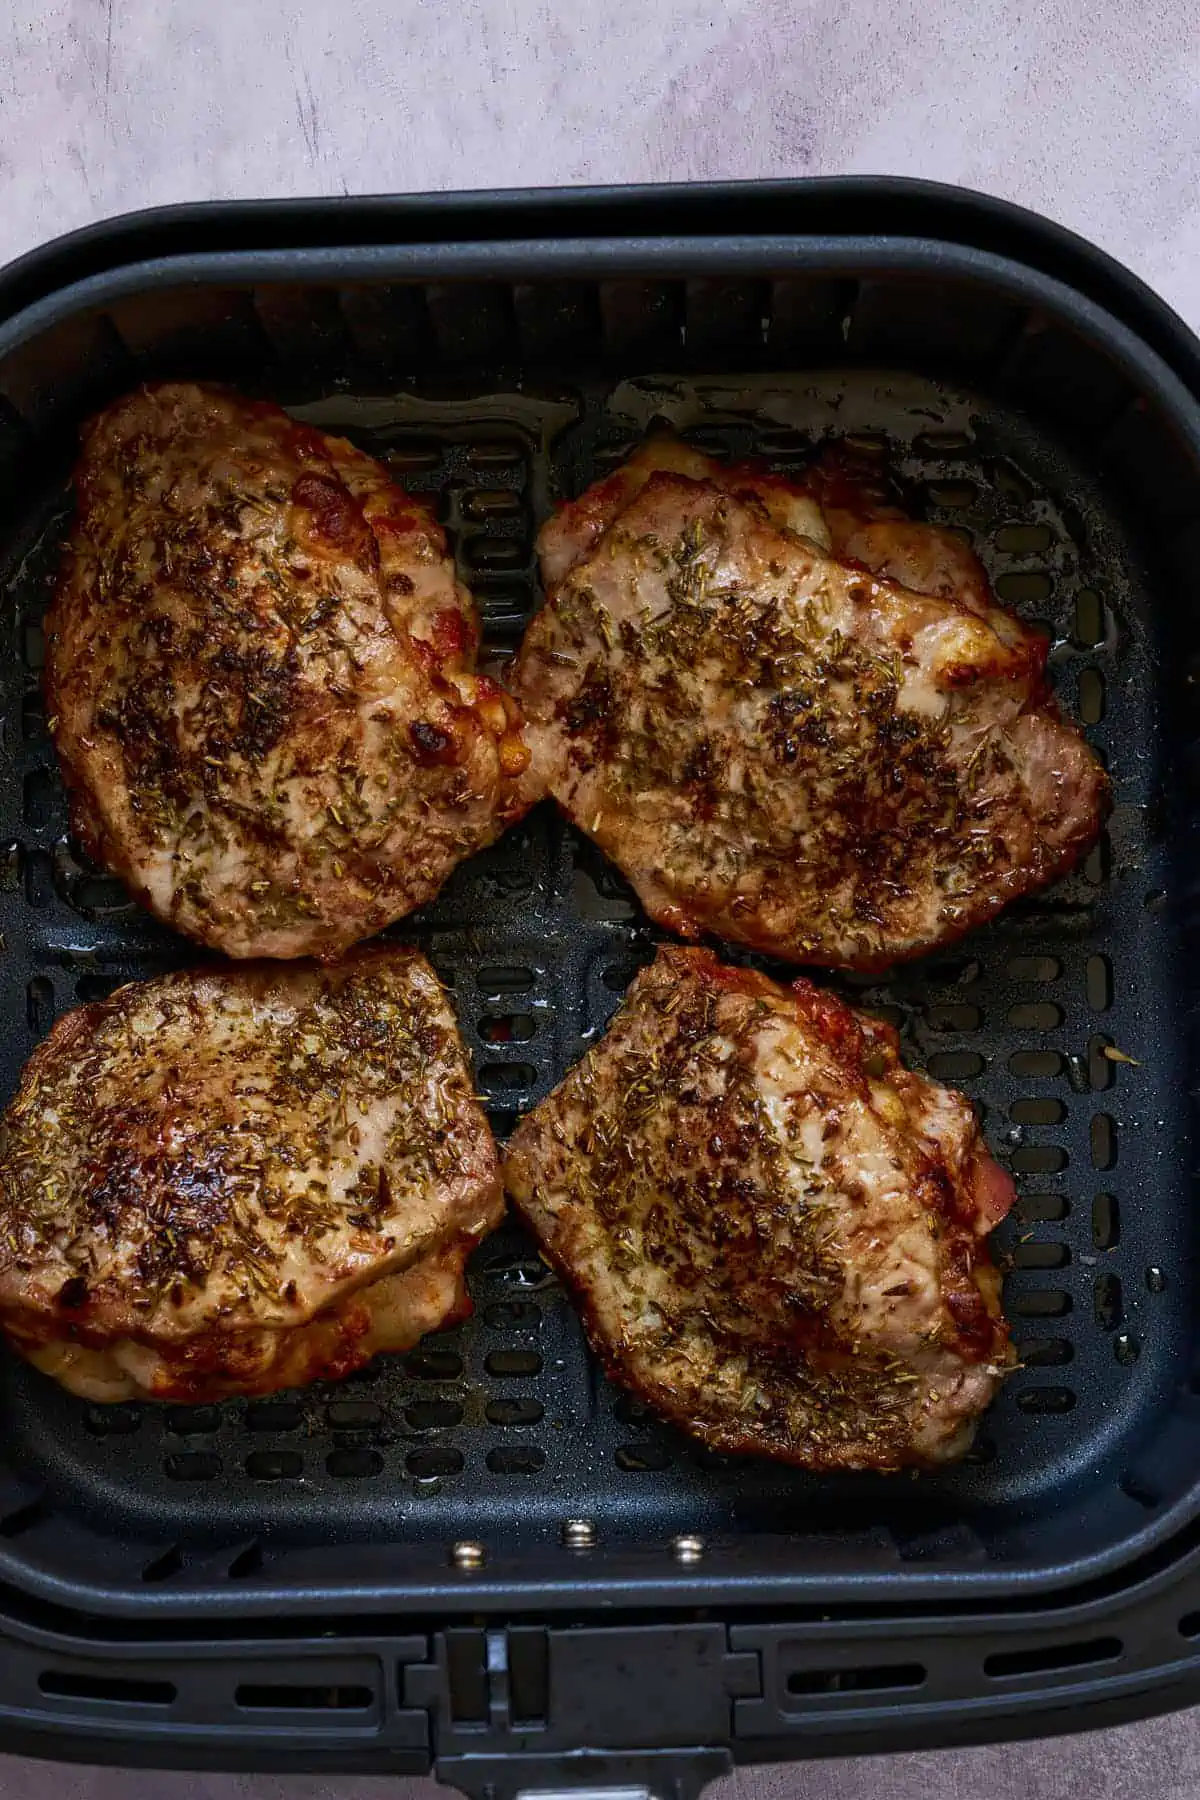 Stuffed pork chops seasoned with oregano, rosemary, and thyme in the air fryer basket.